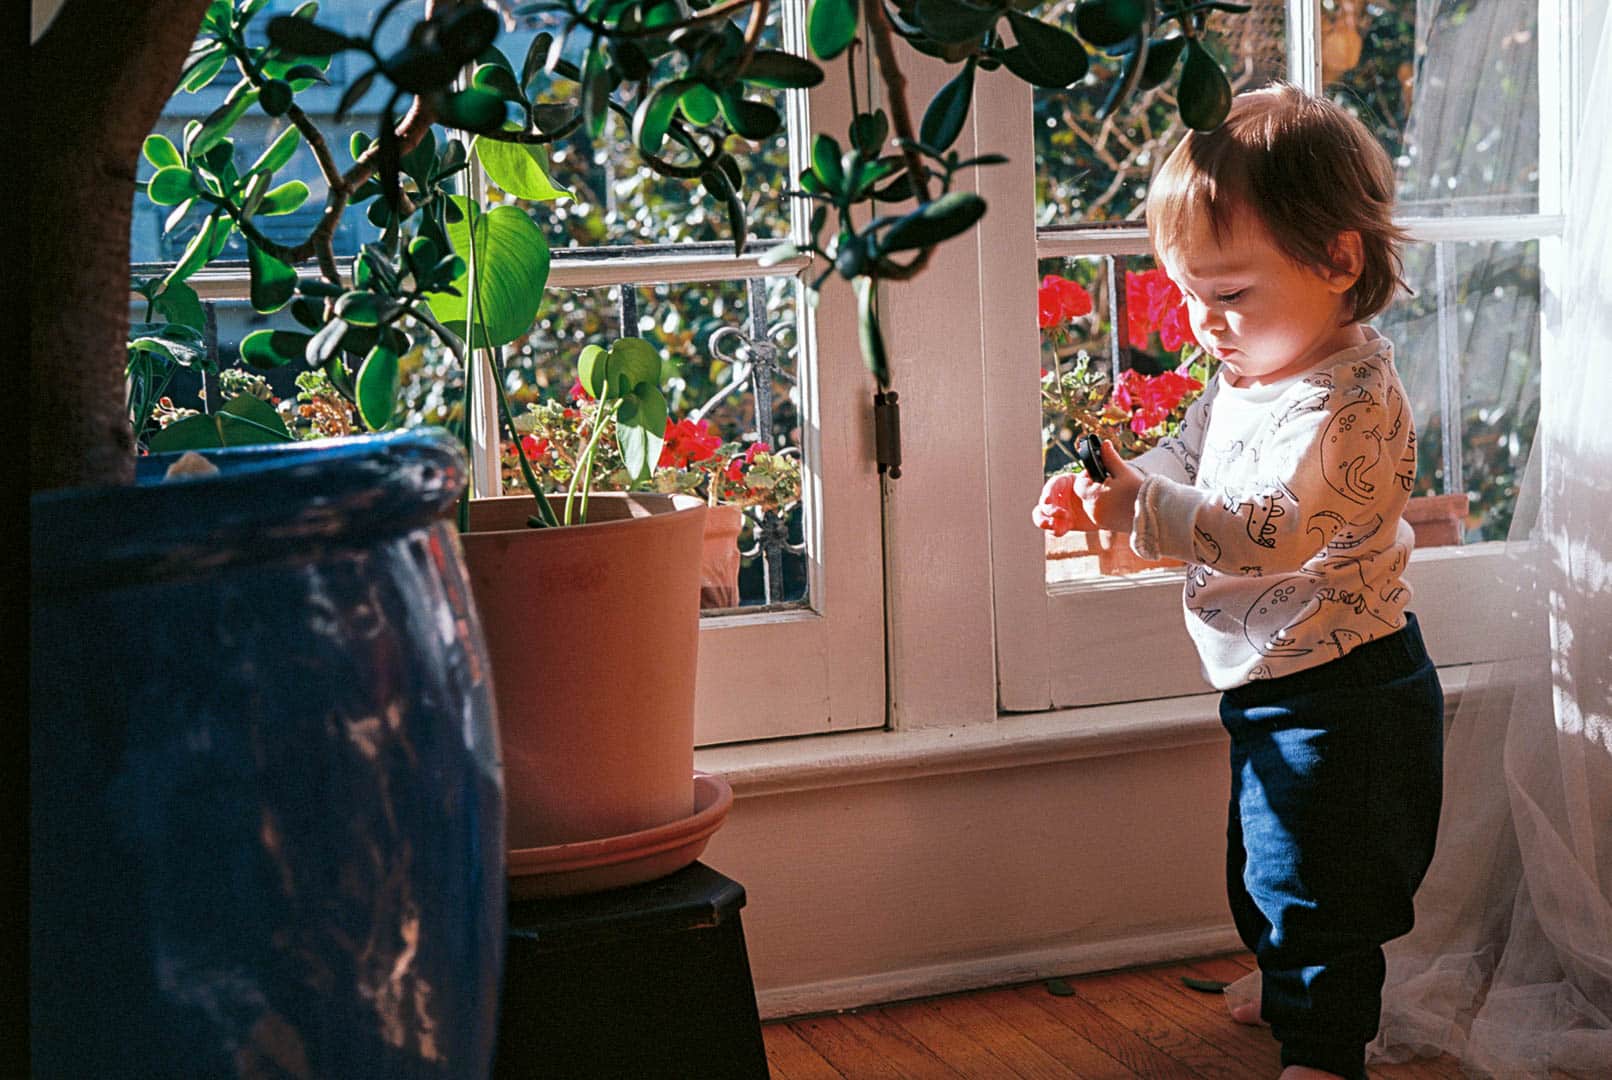 A baby standing next to a window as the sun streams in